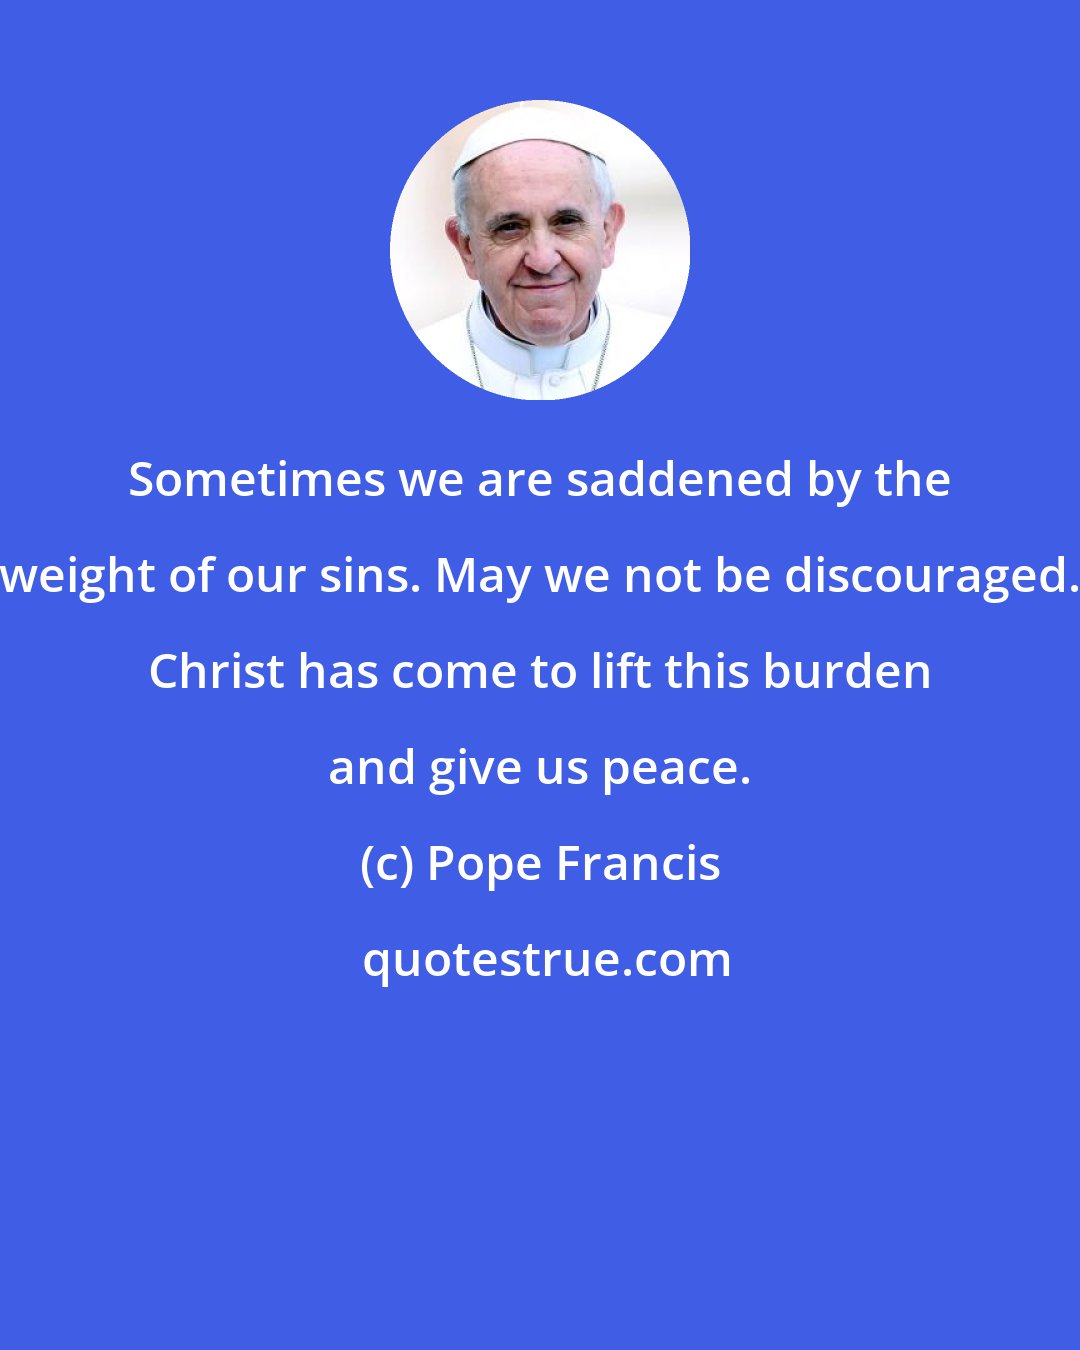 Pope Francis: Sometimes we are saddened by the weight of our sins. May we not be discouraged. Christ has come to lift this burden and give us peace.